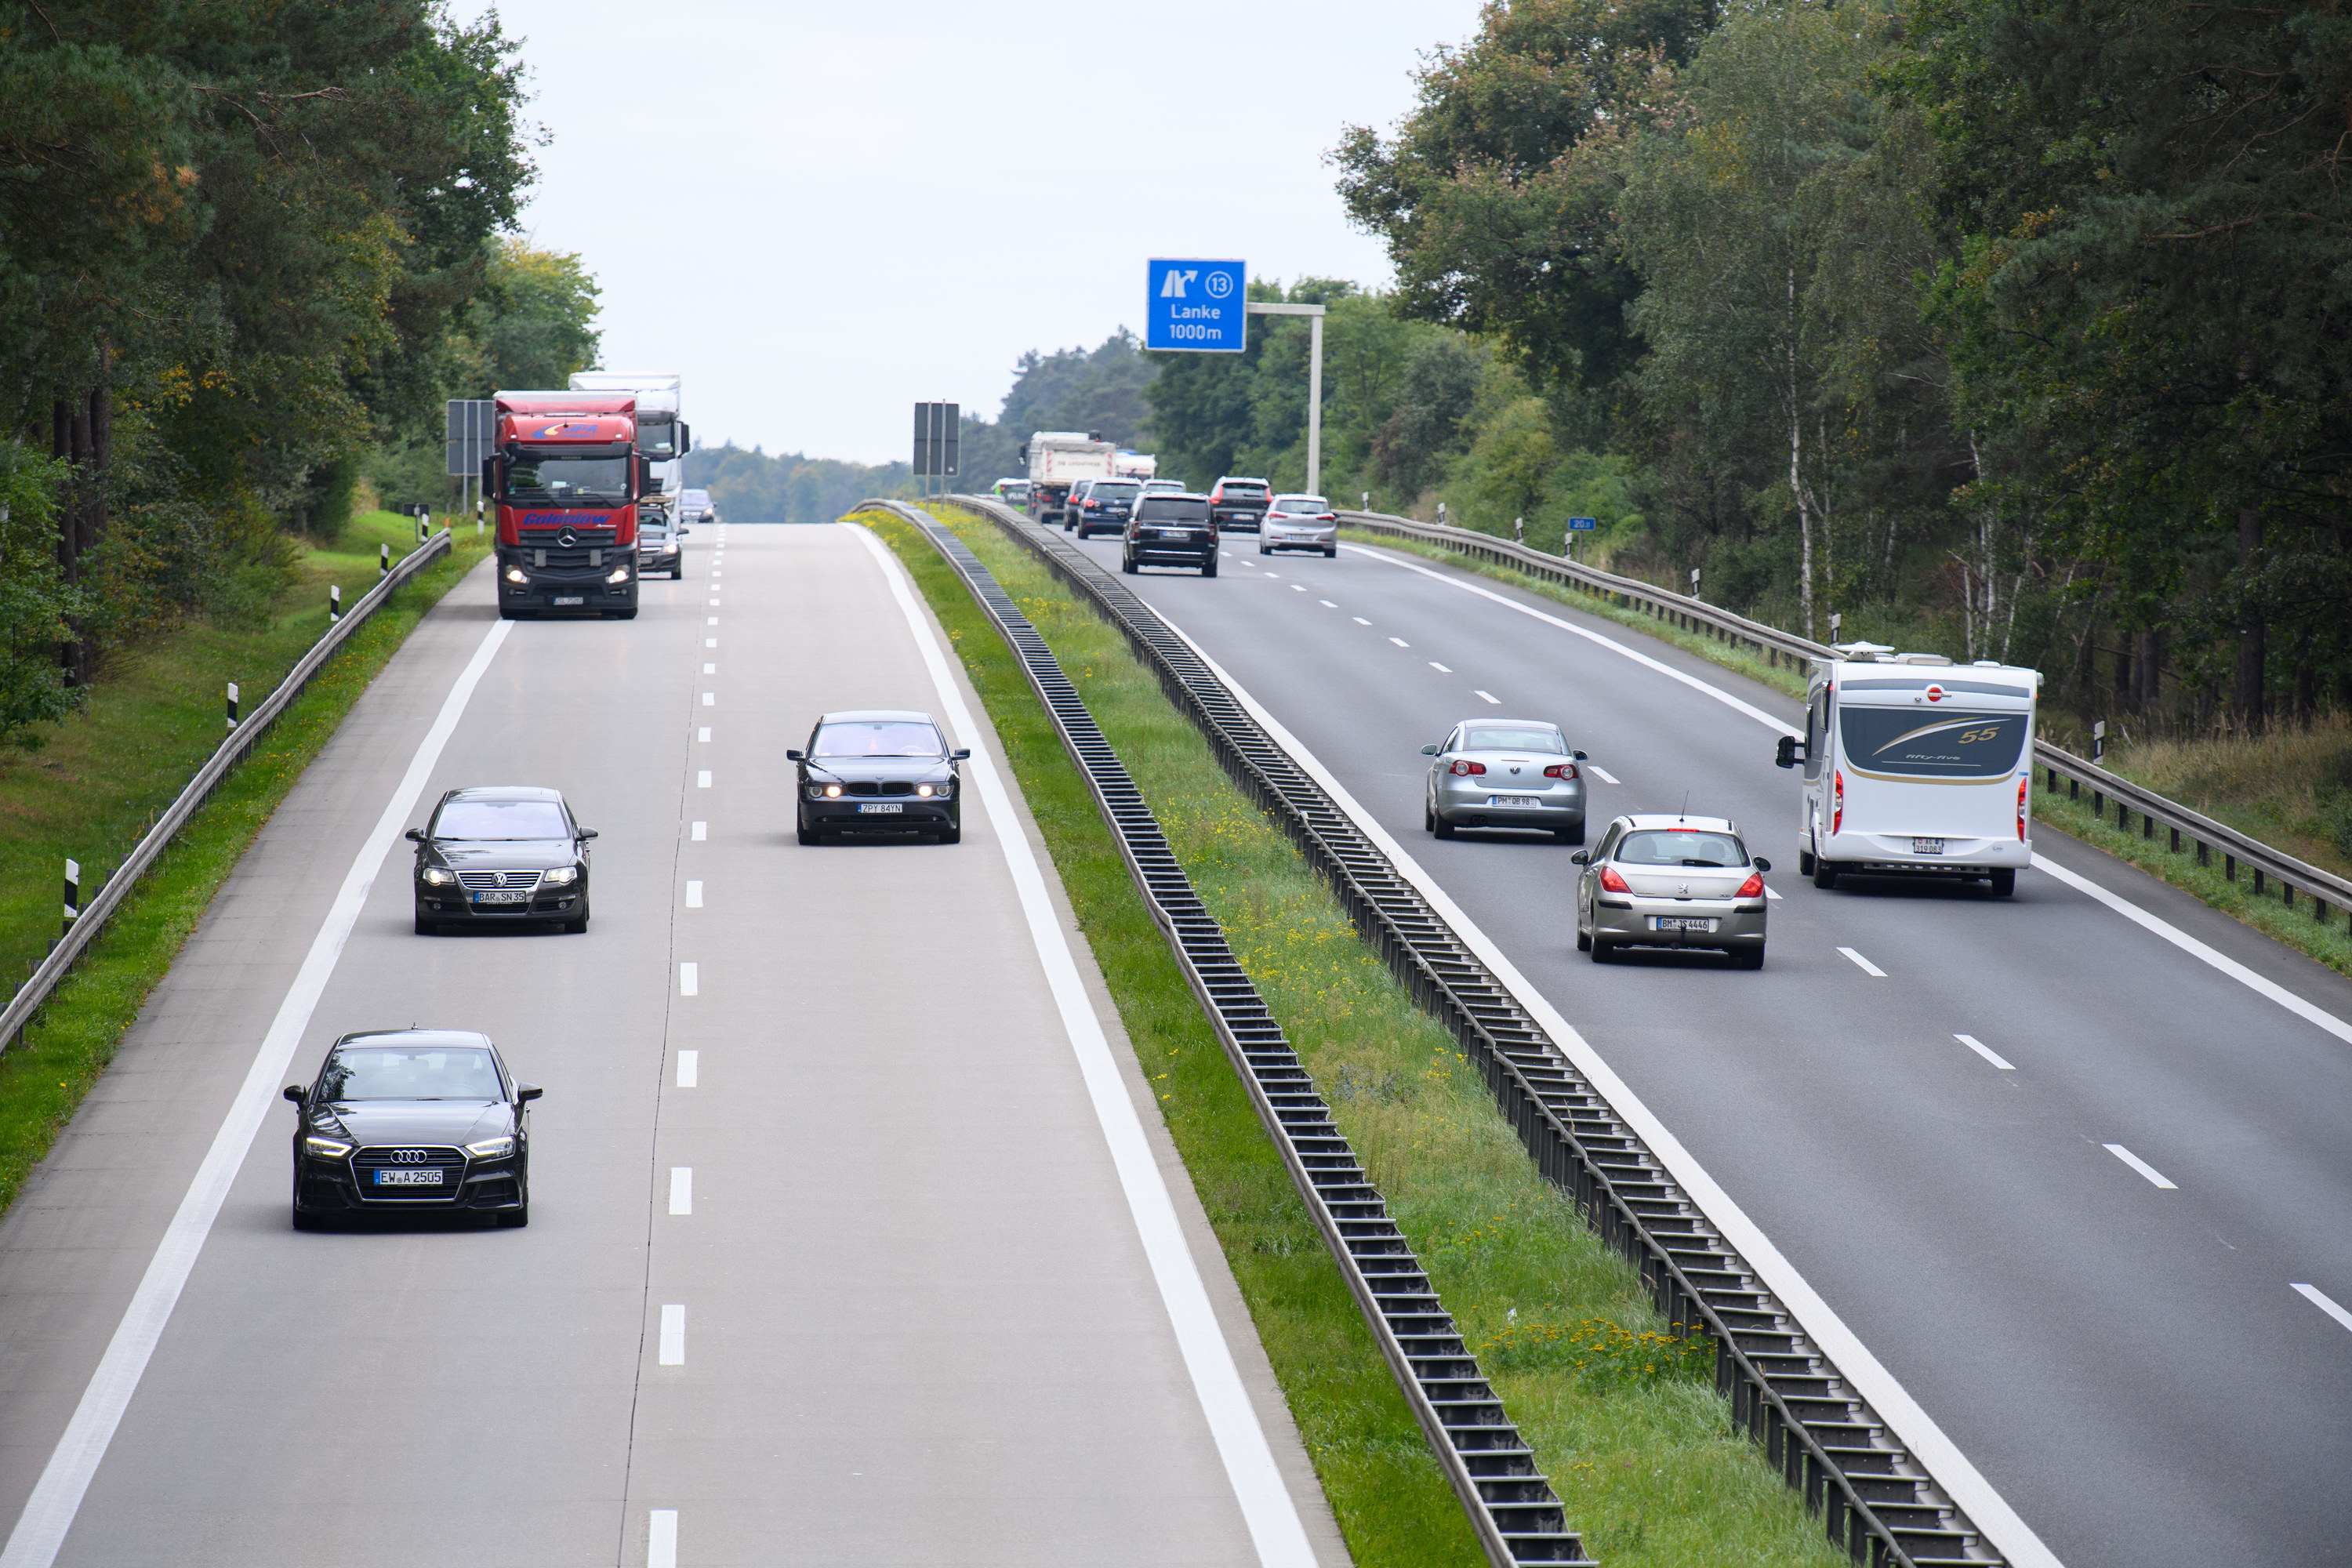 A four lane highway with cars traveling in opposite directions